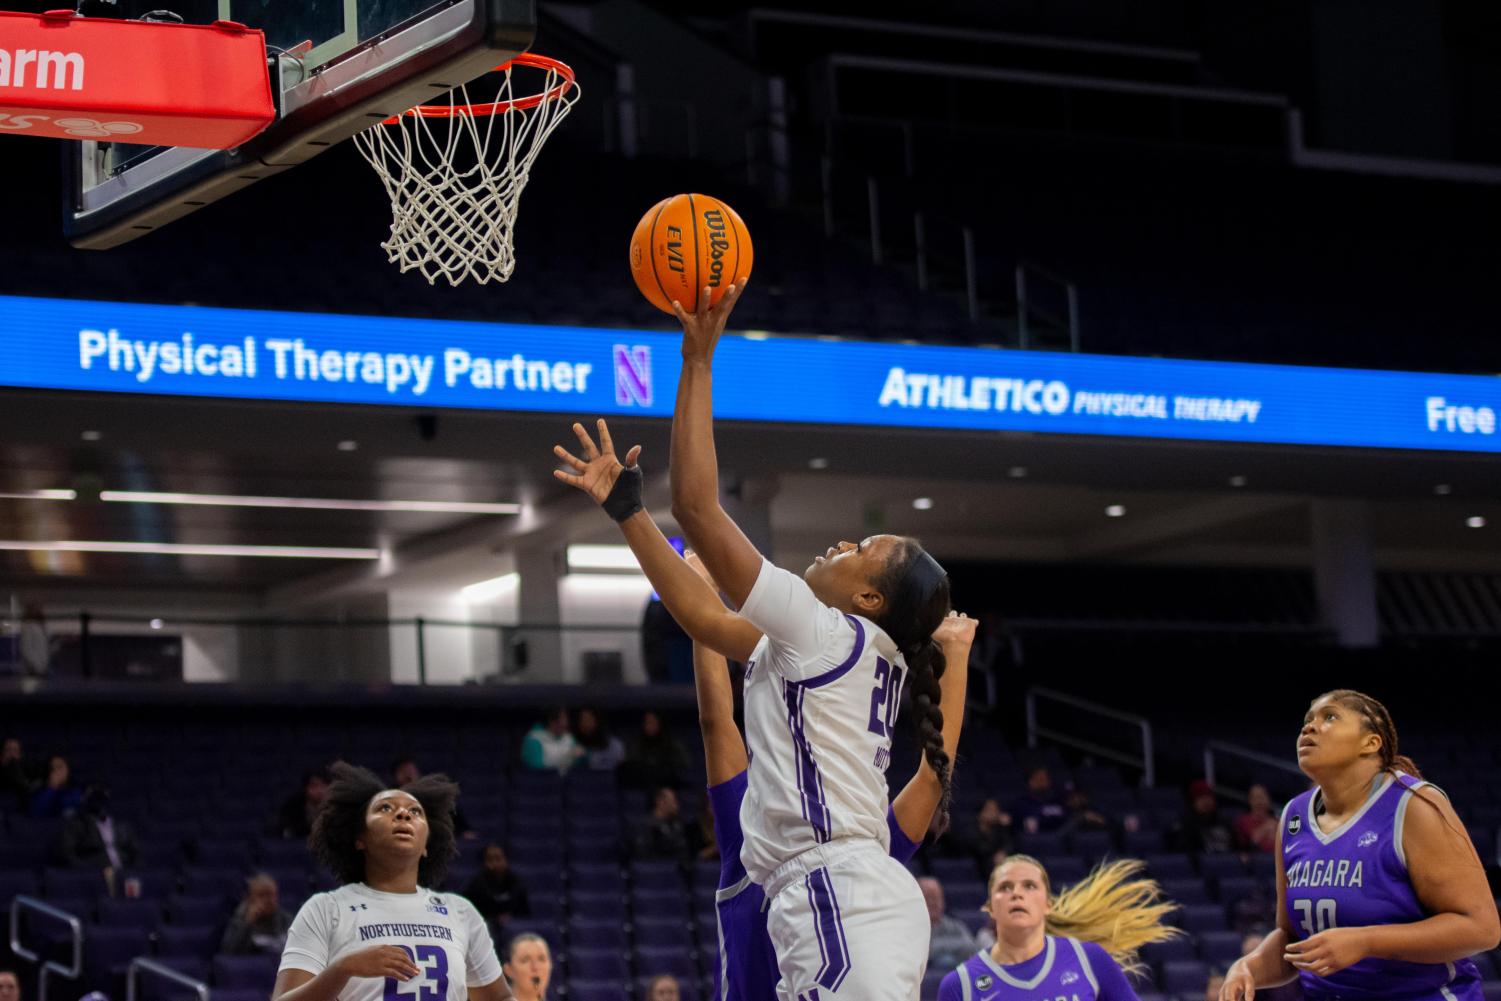 A basketball player in white jumps to bring the basketball closer to the hoop as they attempt to shoot while other players in purple and white watch.